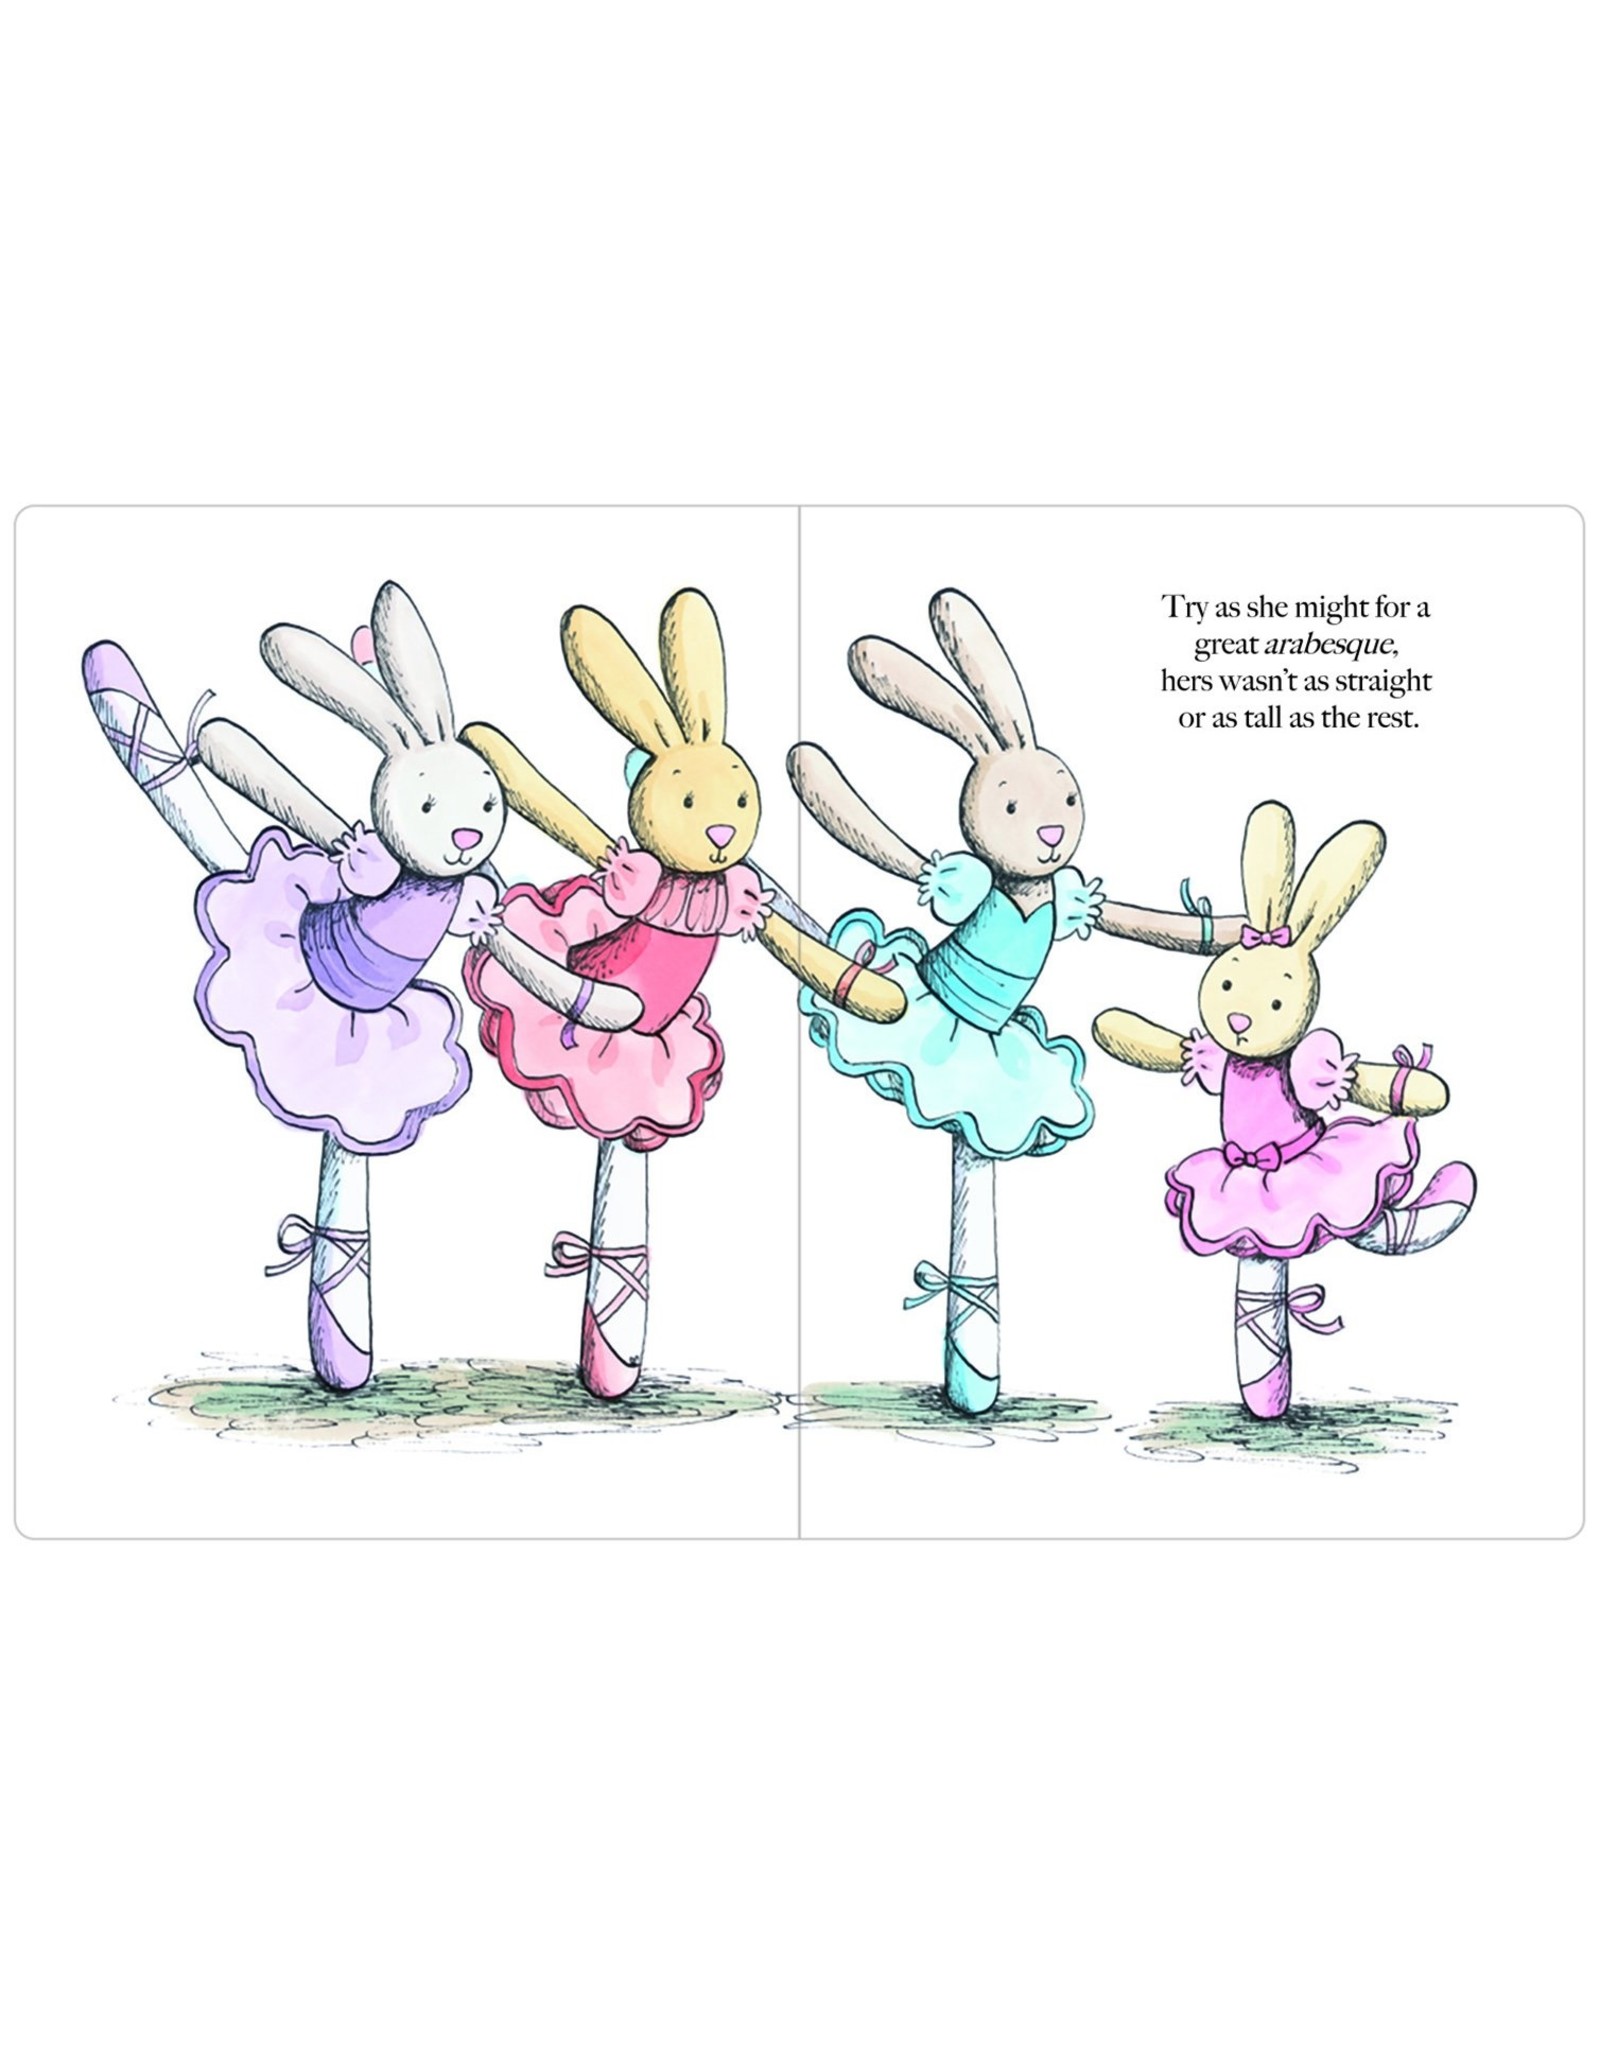 Jelly Cat Bitsy Ballerina Learns To Dance Book